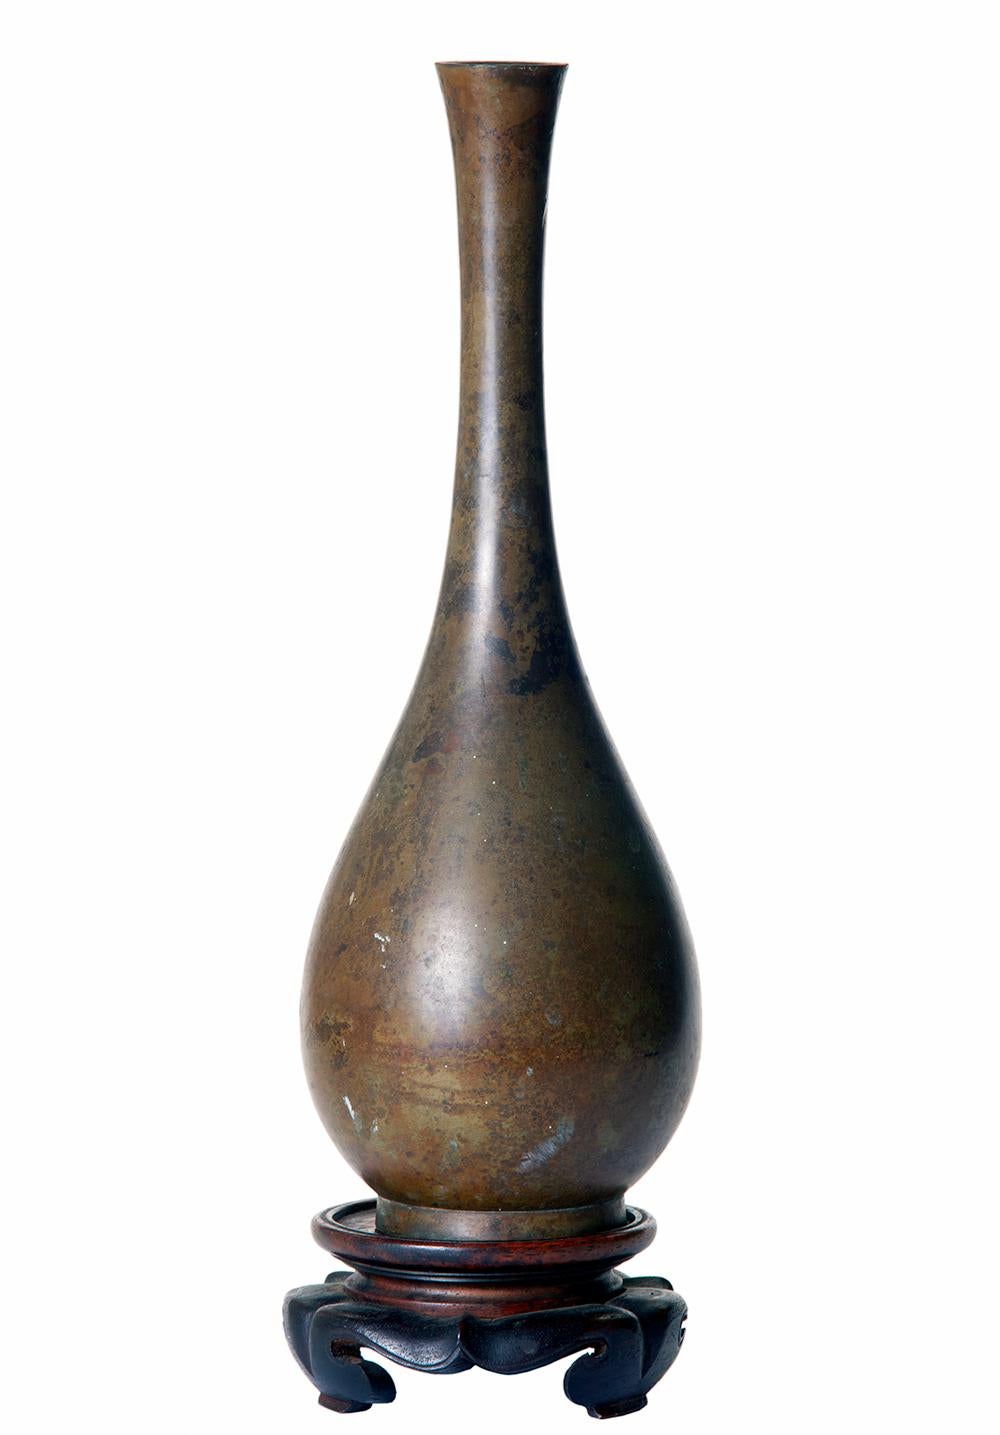 Tall Asian bronze bud vase with a smooth mottled hand.
The slender vase sits on a hand carved rosewood stand.